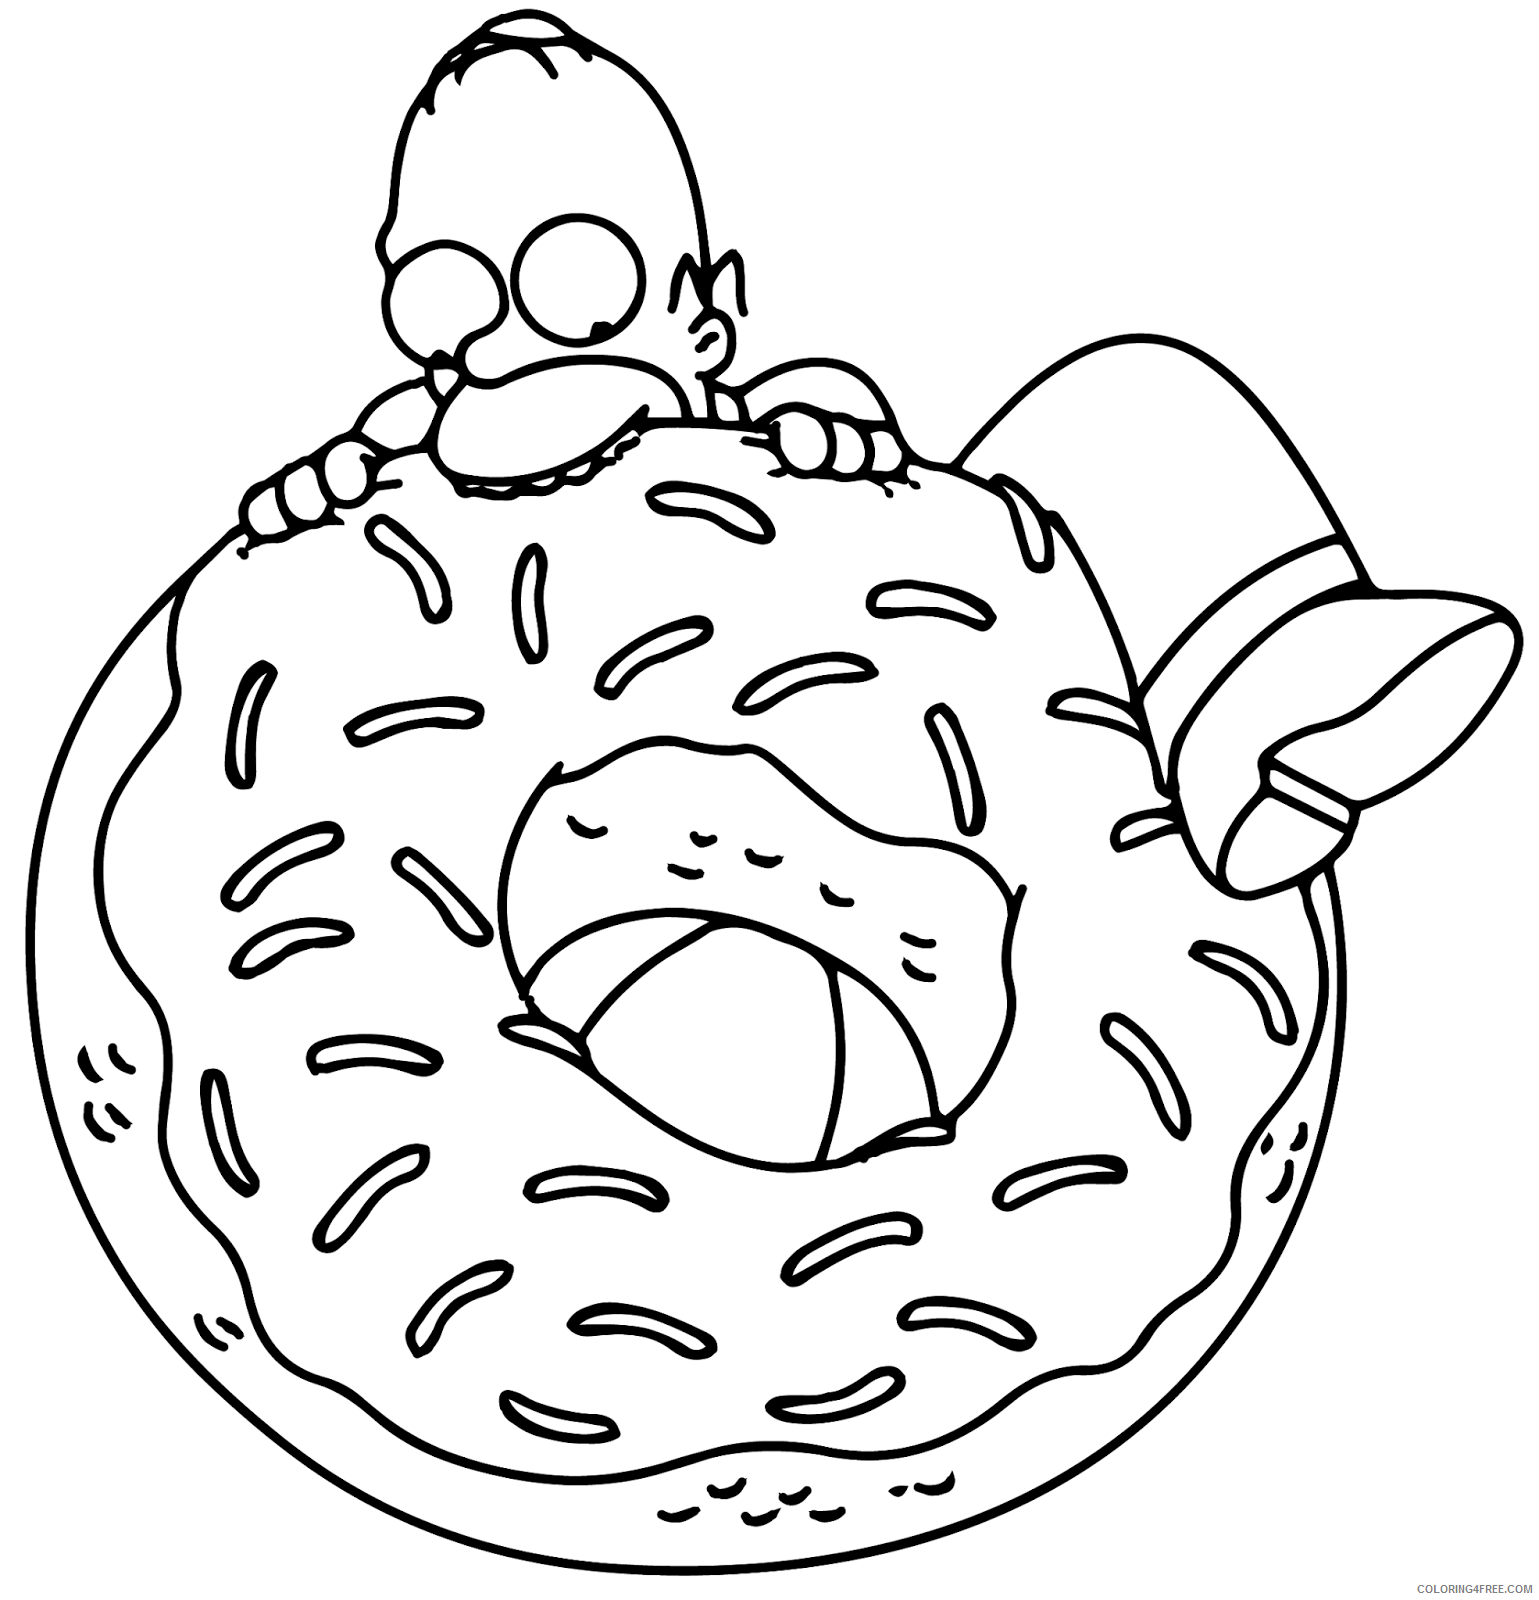 The Simpsons Coloring Pages TV Film Donut Homer Simpsons Printable 2020 09543 Coloring4free